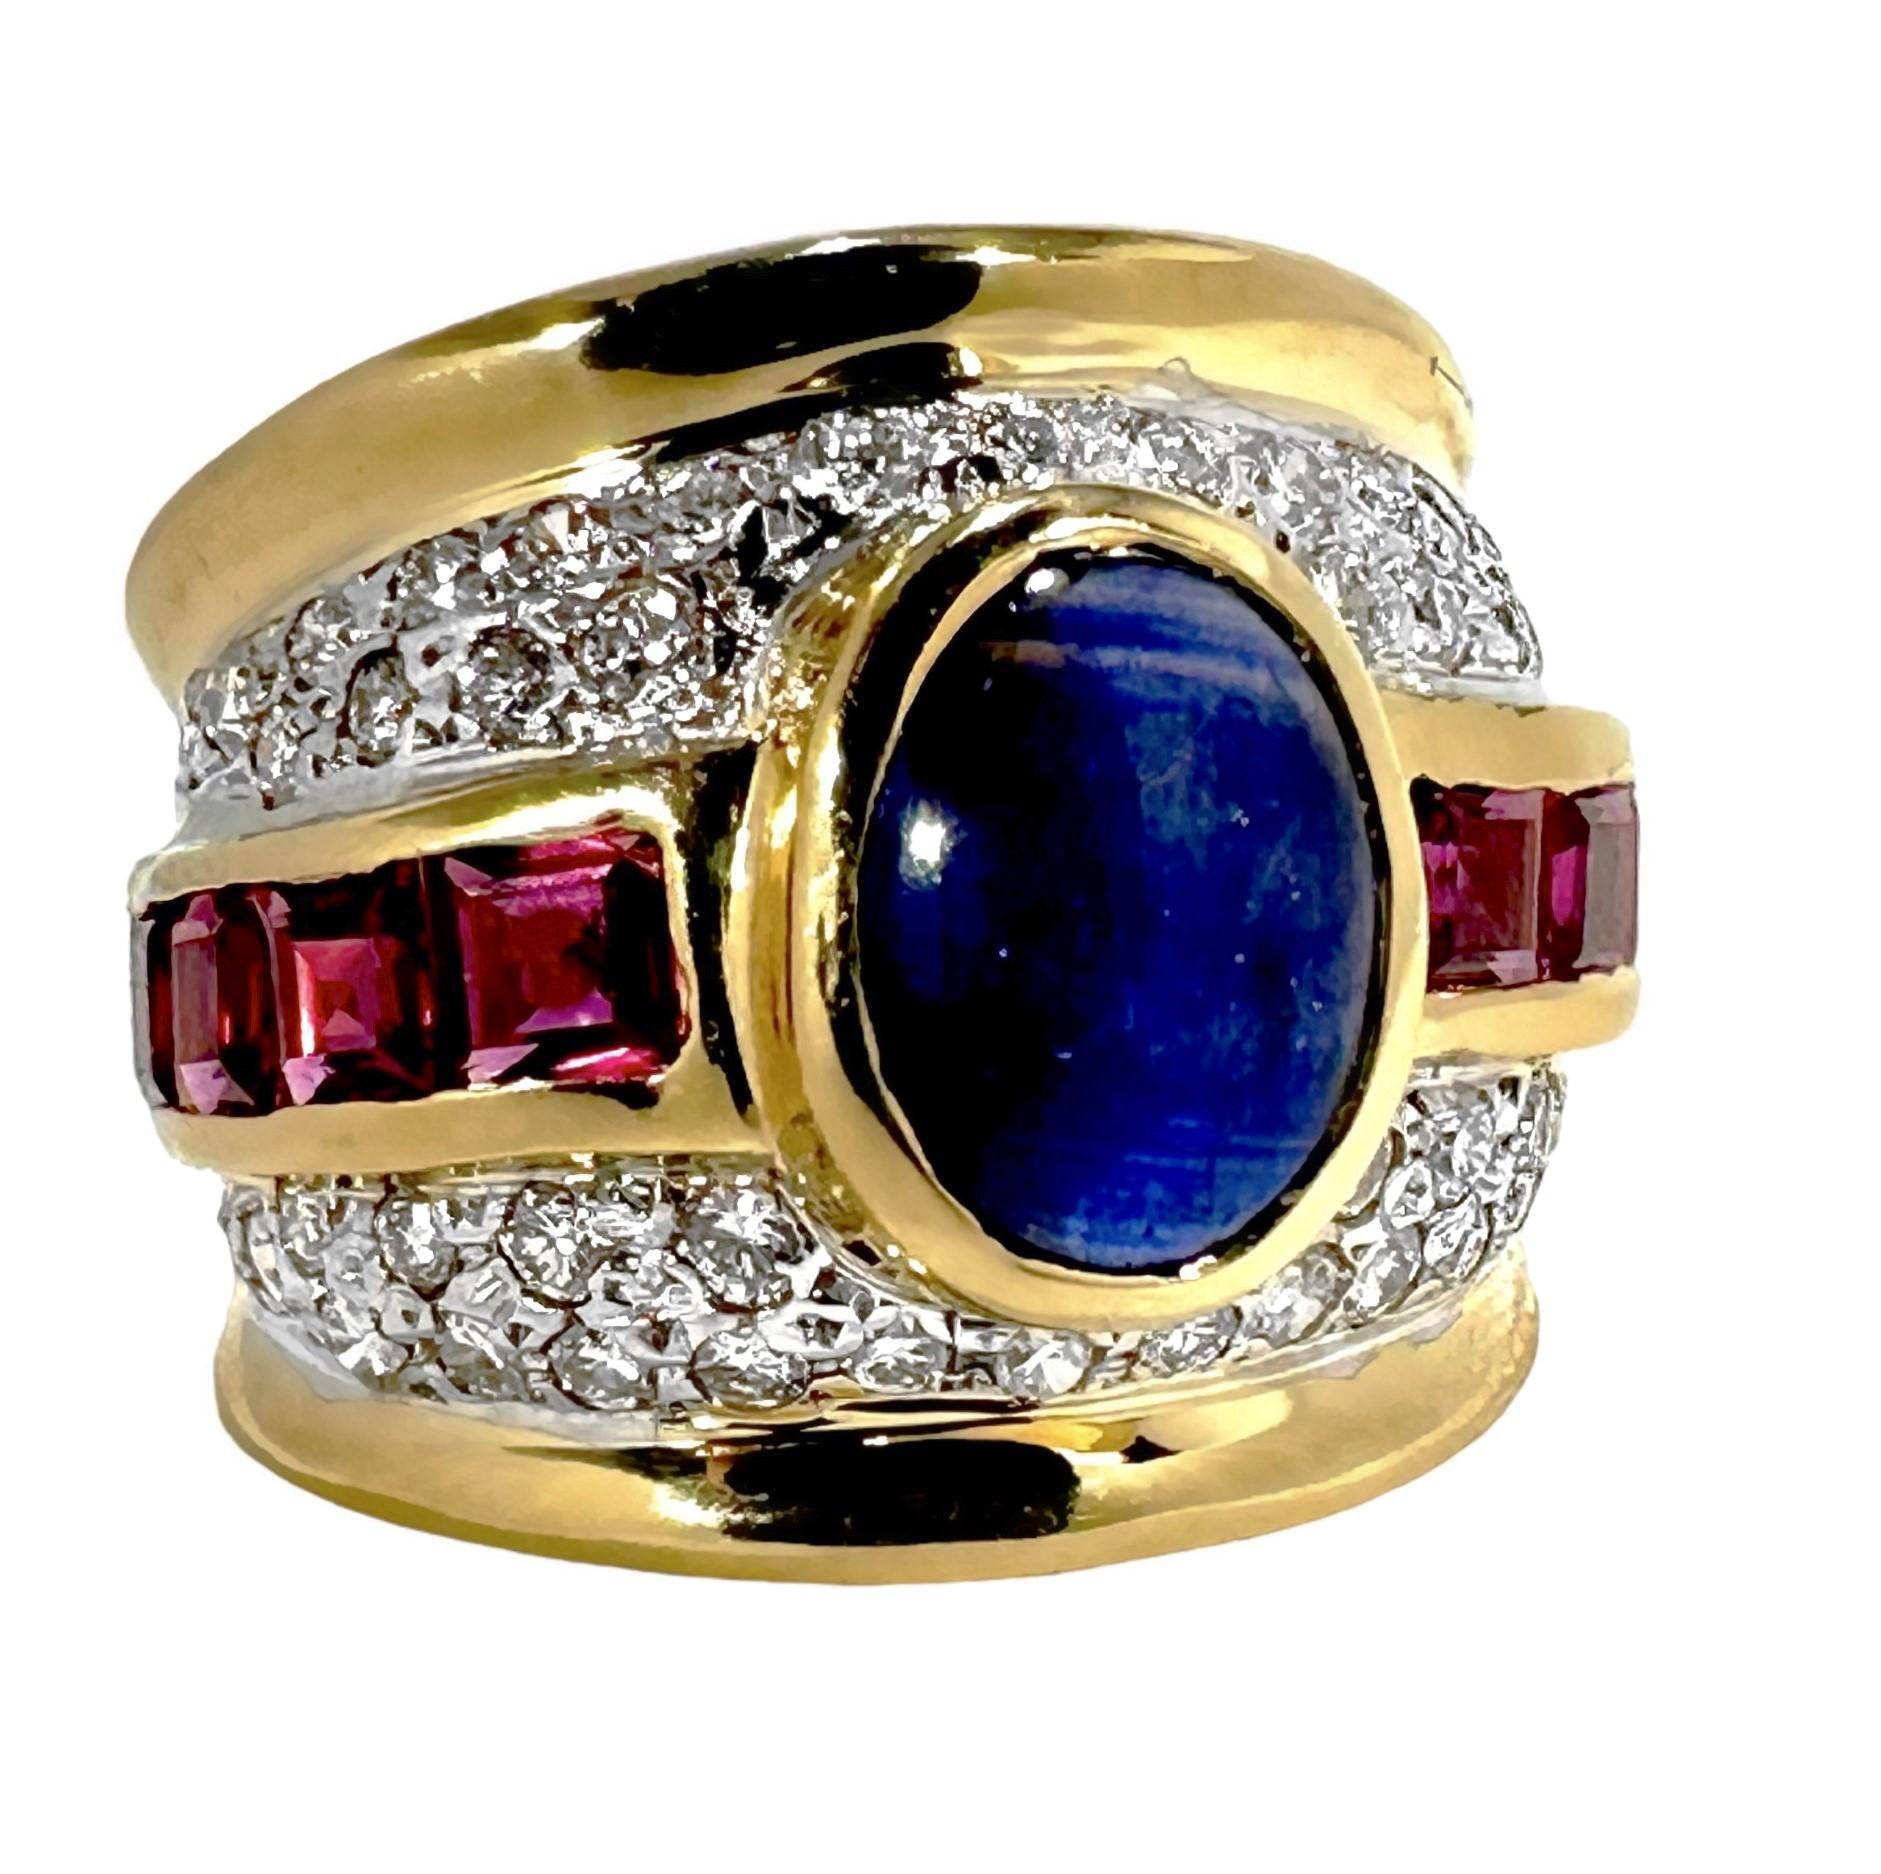 This bold 14k yellow gold vintage cocktail ring embodies the spirit and iconic styling cues of the 1970's.
The bezel set, oval shaped, rich blue, natural sapphire cabochon, in the center, weighs approximately 2.60ct. Flanking the sapphire are two